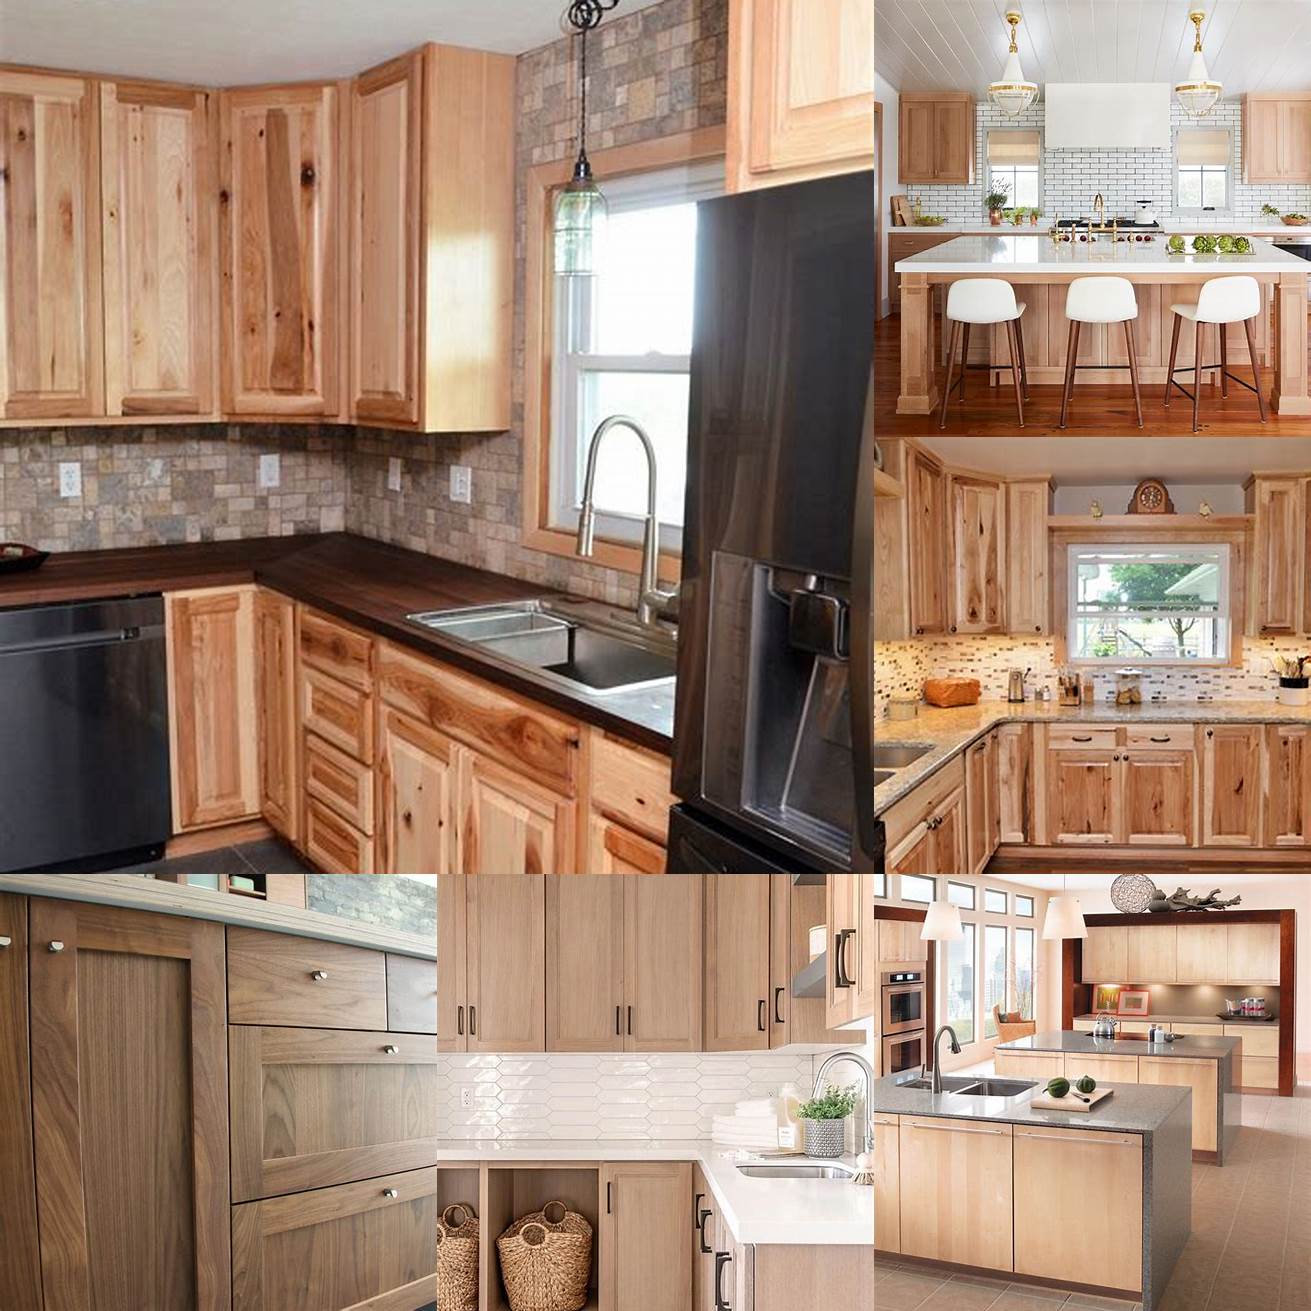 Wooden kitchen doors with a natural finish